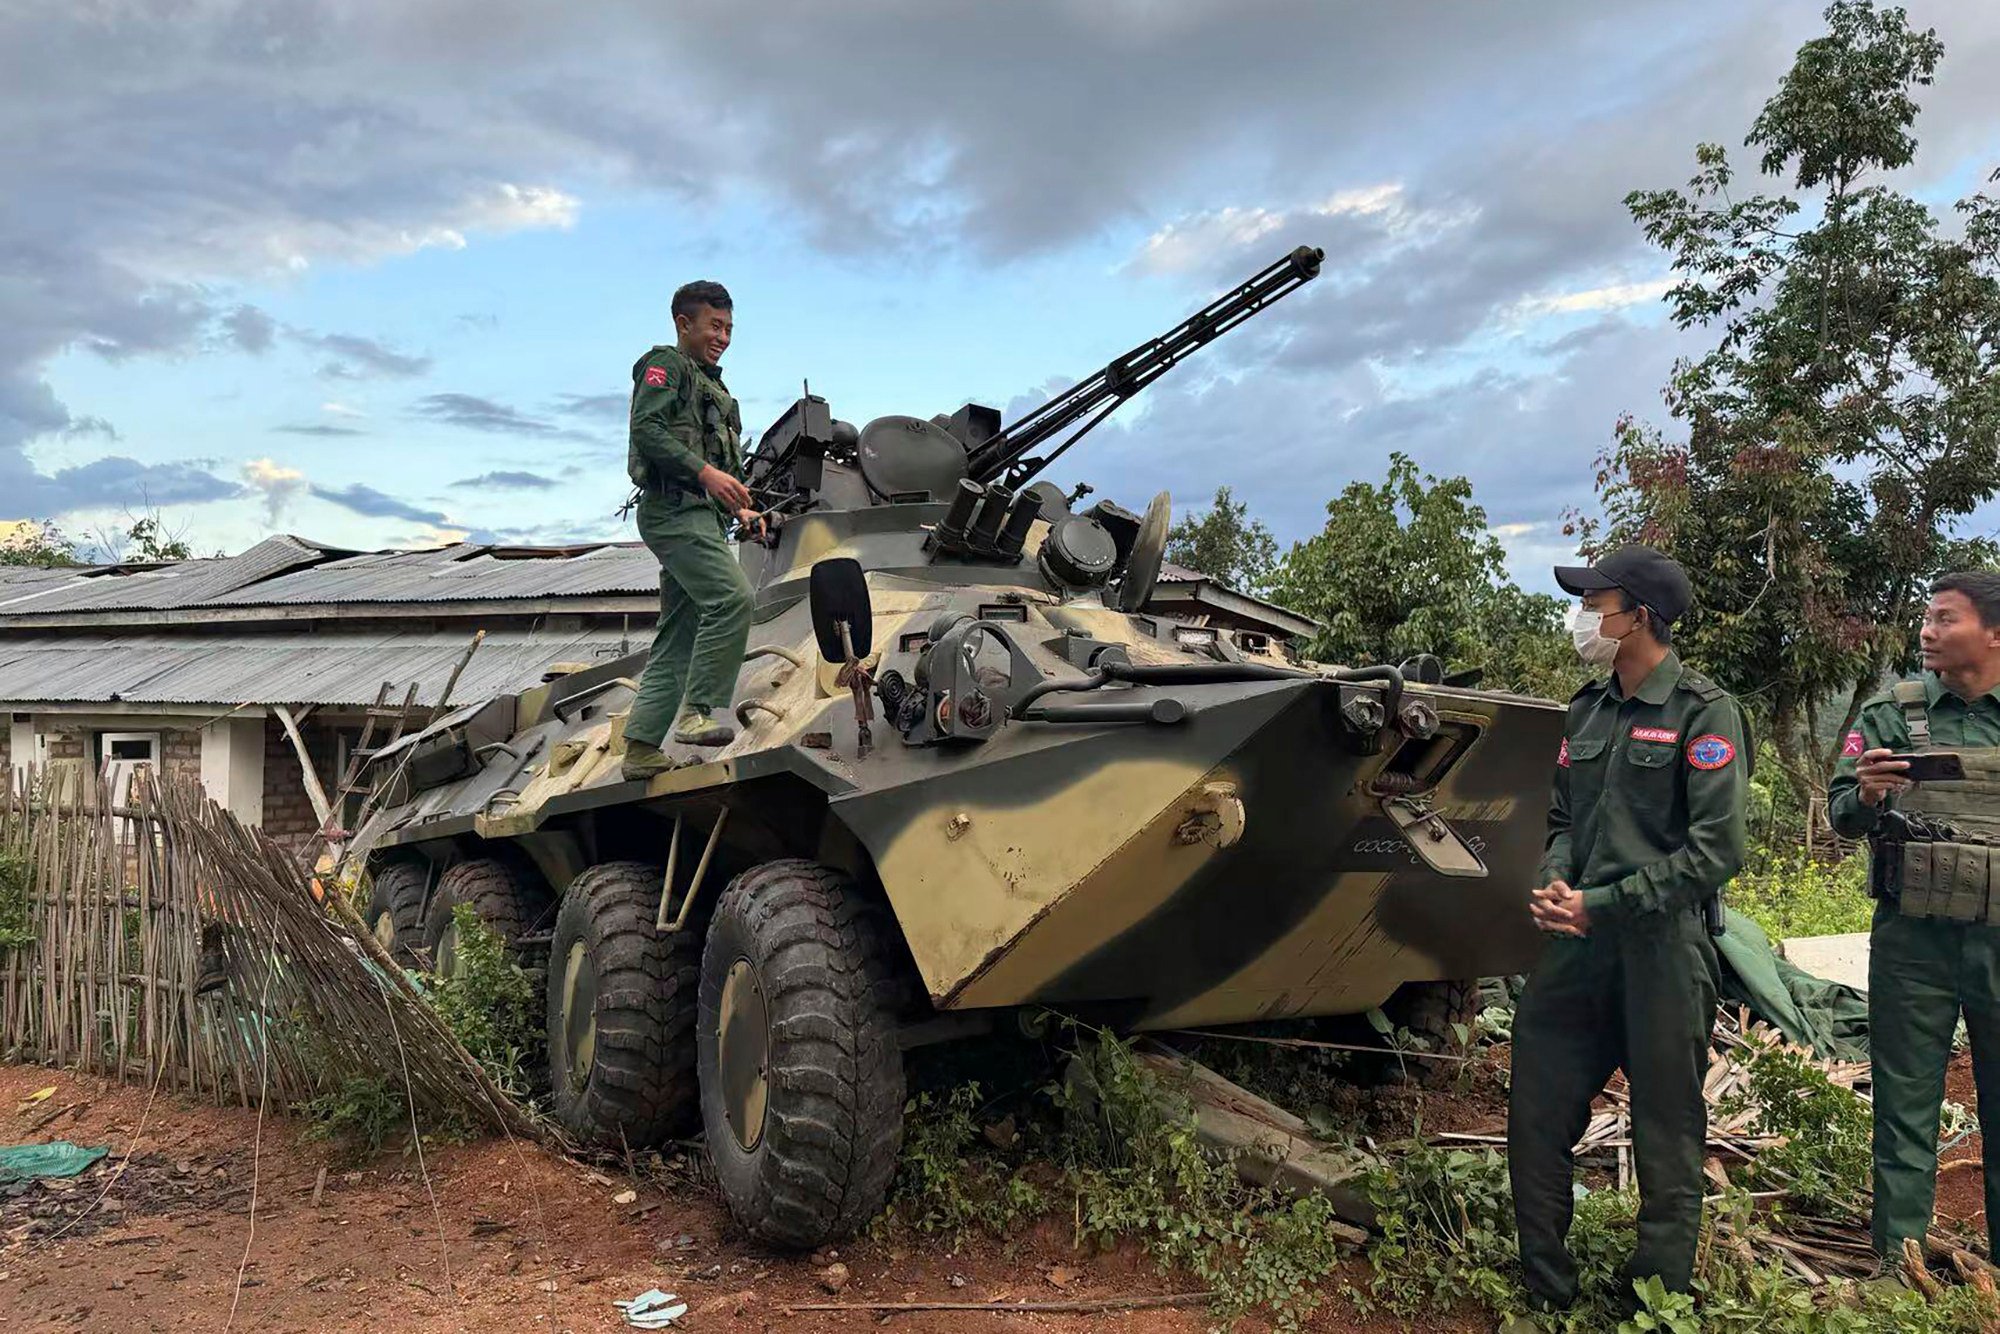 Members of an ethnic armed forces group, one of the three militias known as the Three Brotherhood Alliance, check an army armoured vehicle the group allegedly seized from Myanmar’s army outpost on a hill in Hsenwi township in Shan state last month. Photo: The Kokang online media via AP